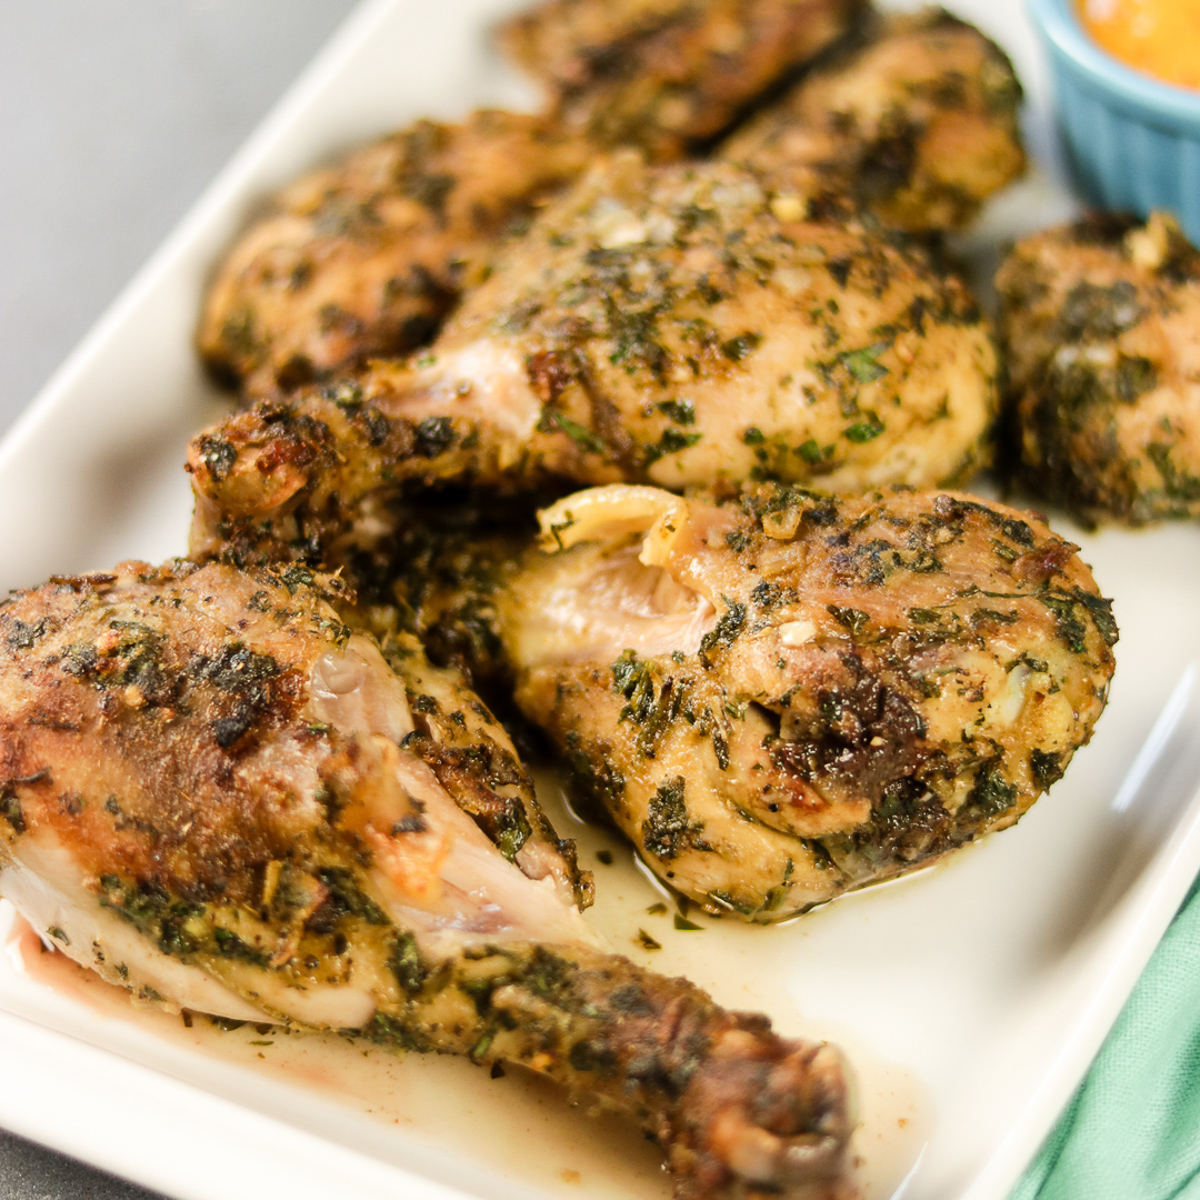 CARIBBEAN FOOD RECIPES CHICKEN THAT DANCES WITH FLAVOR